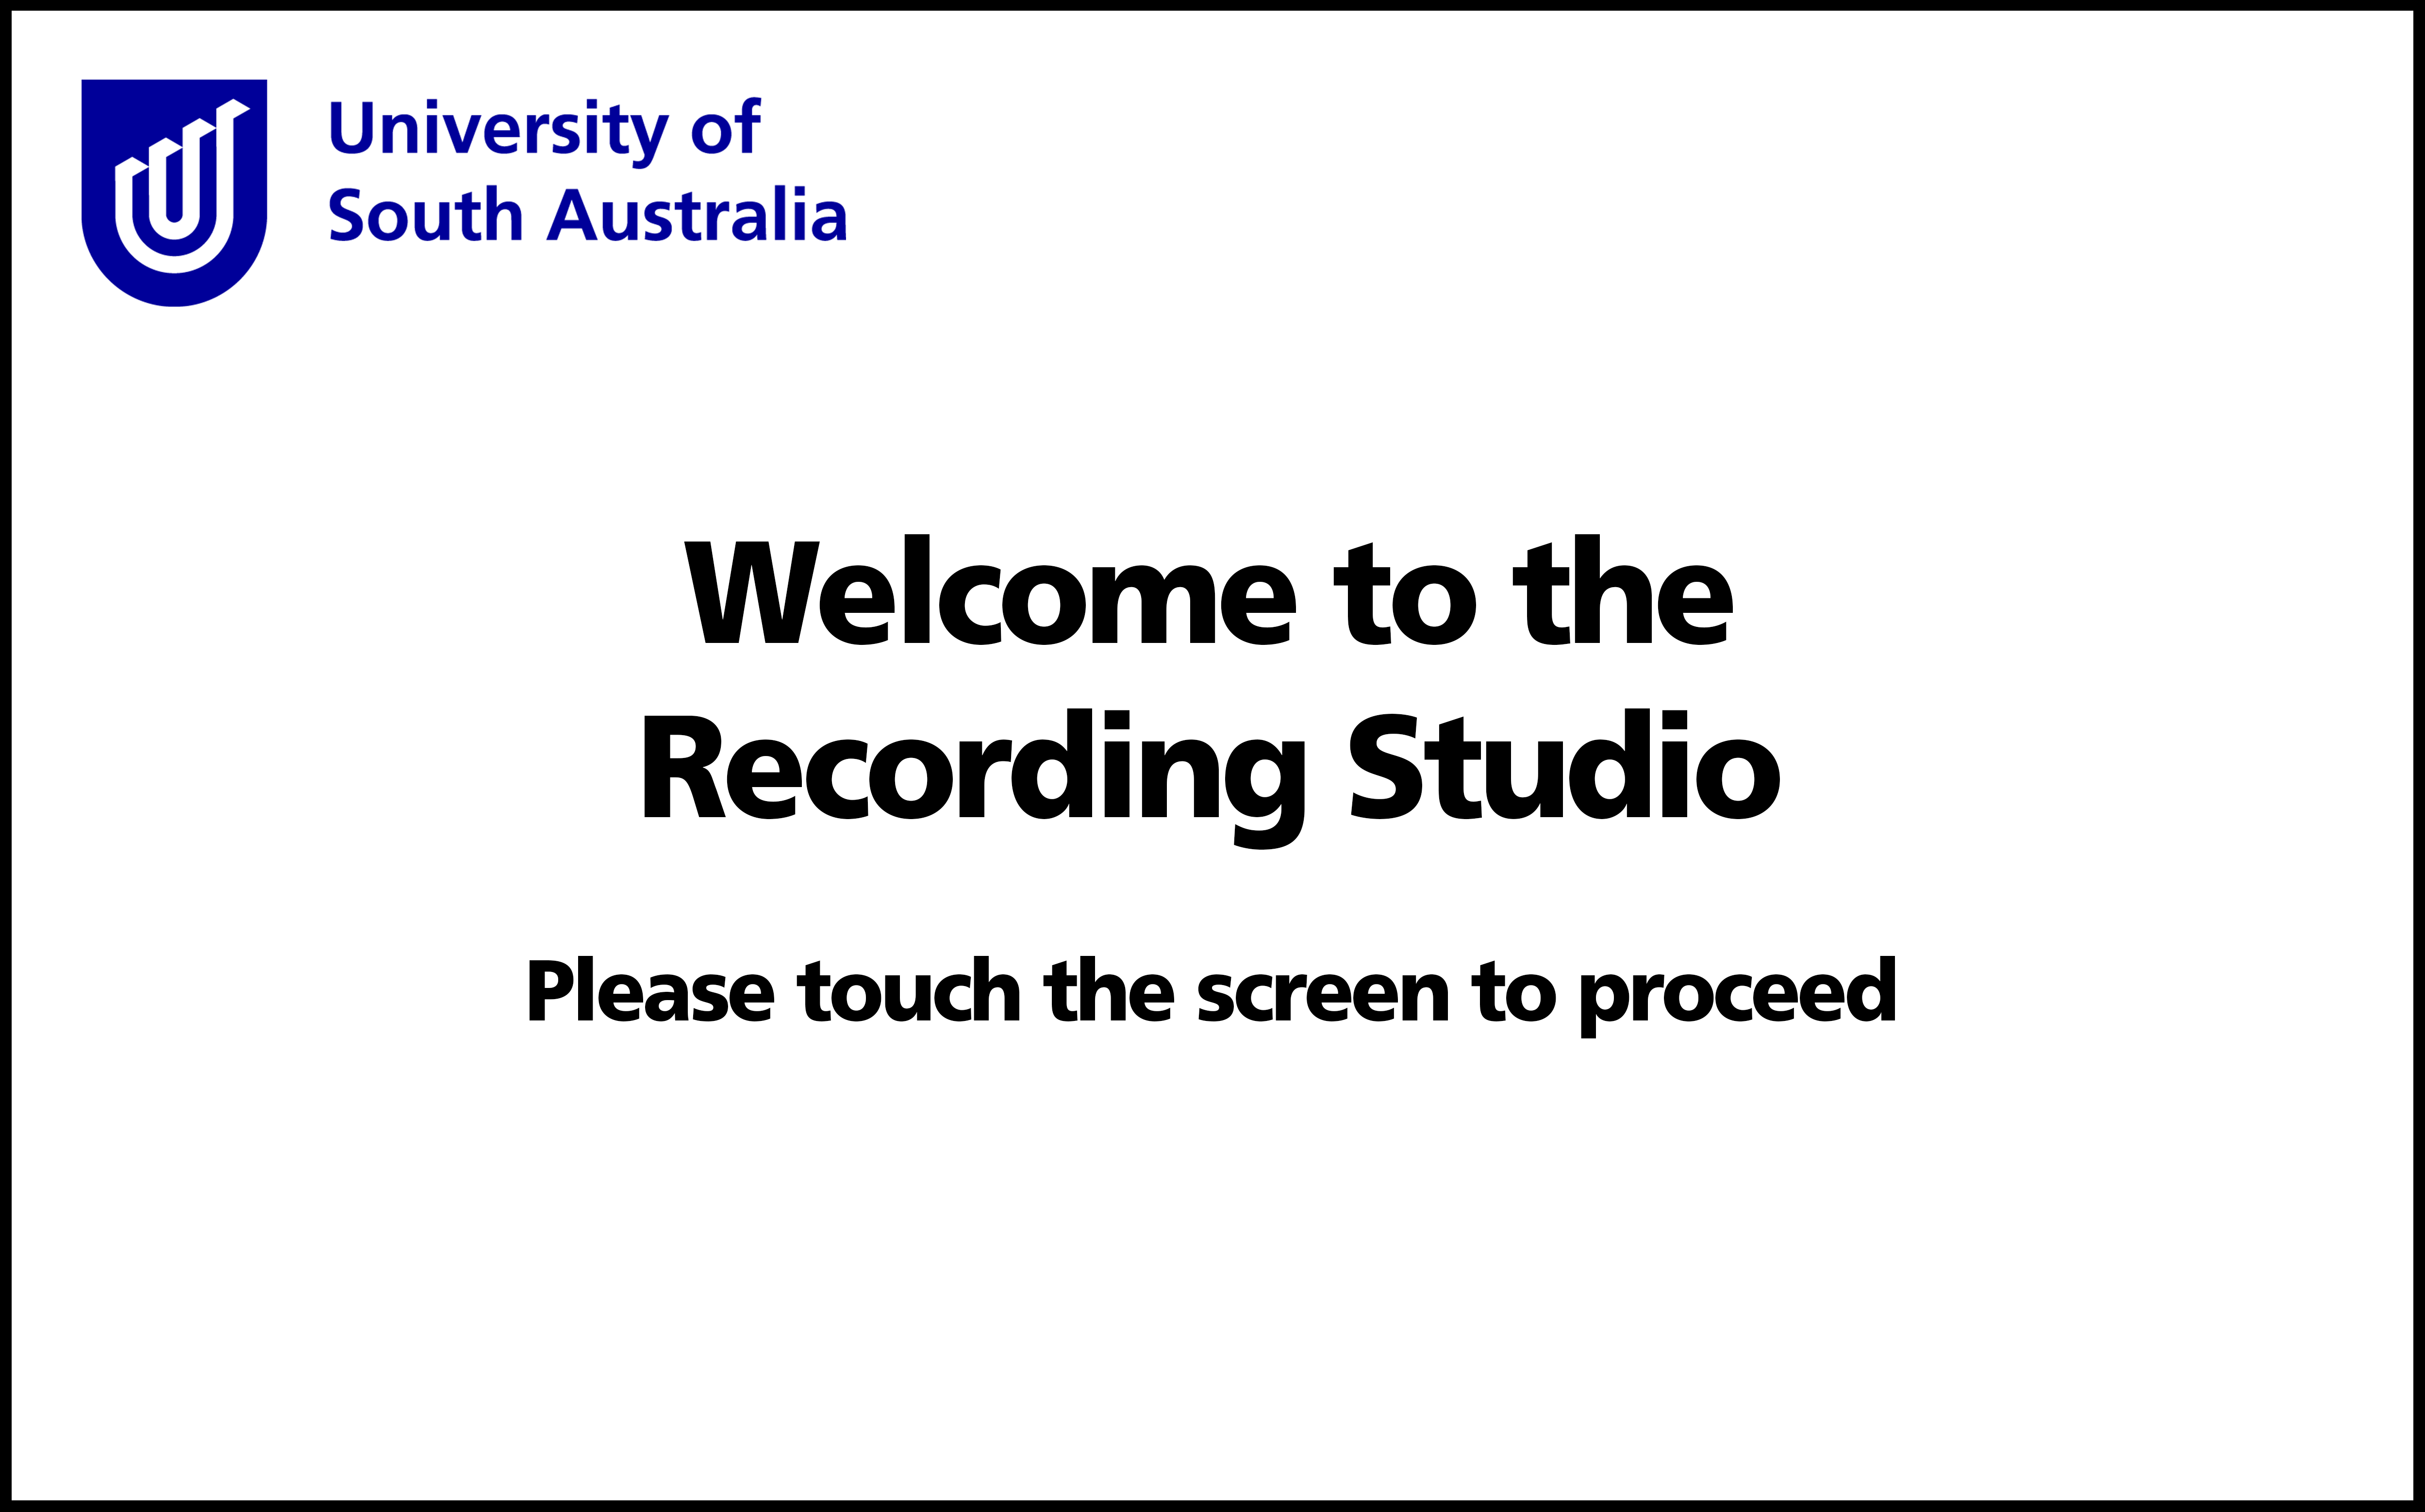 AV Touch Panel from Green Screen Room - welcome screen